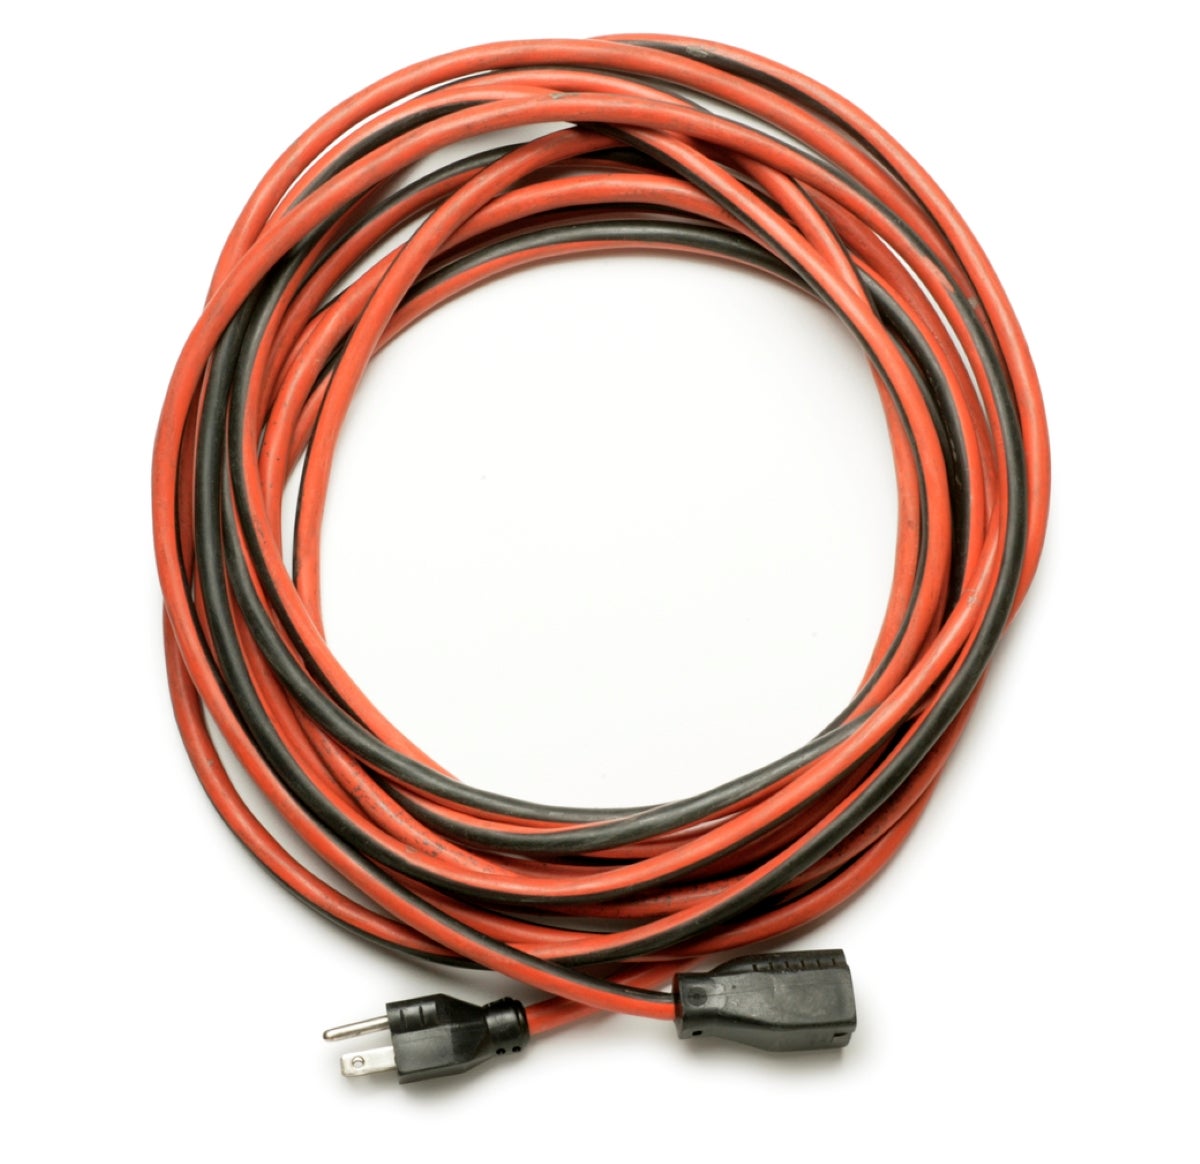 What Is The Best Way To Roll/Fold An Electrical Cord